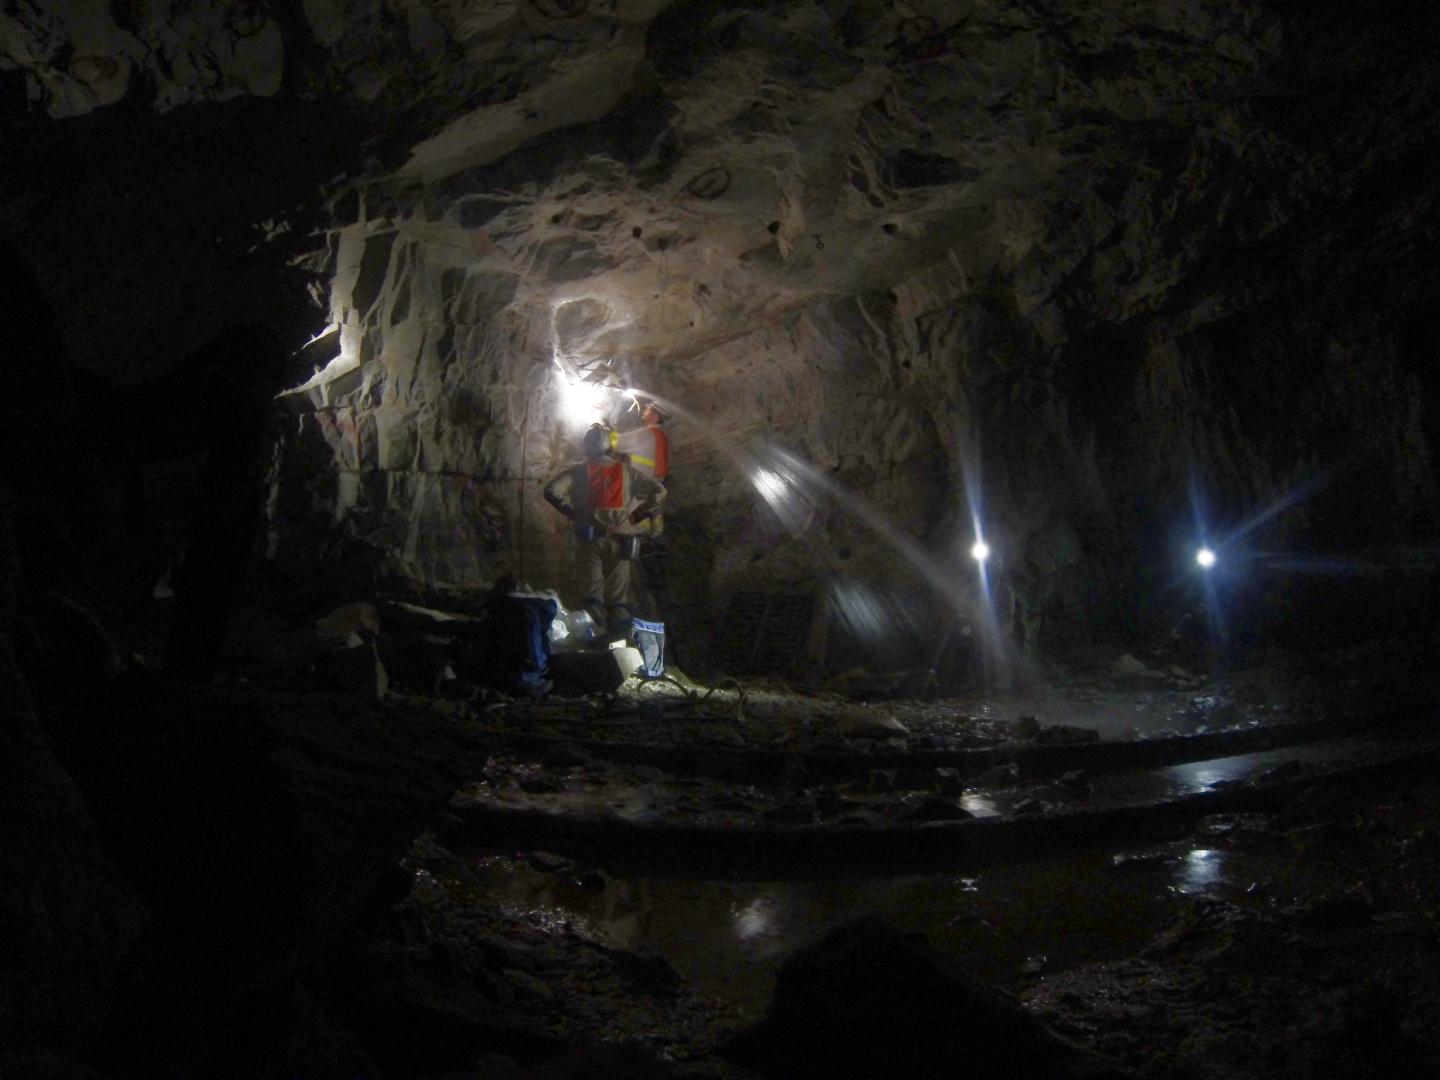 Two Men in Subterranean Cave with Ancient Water